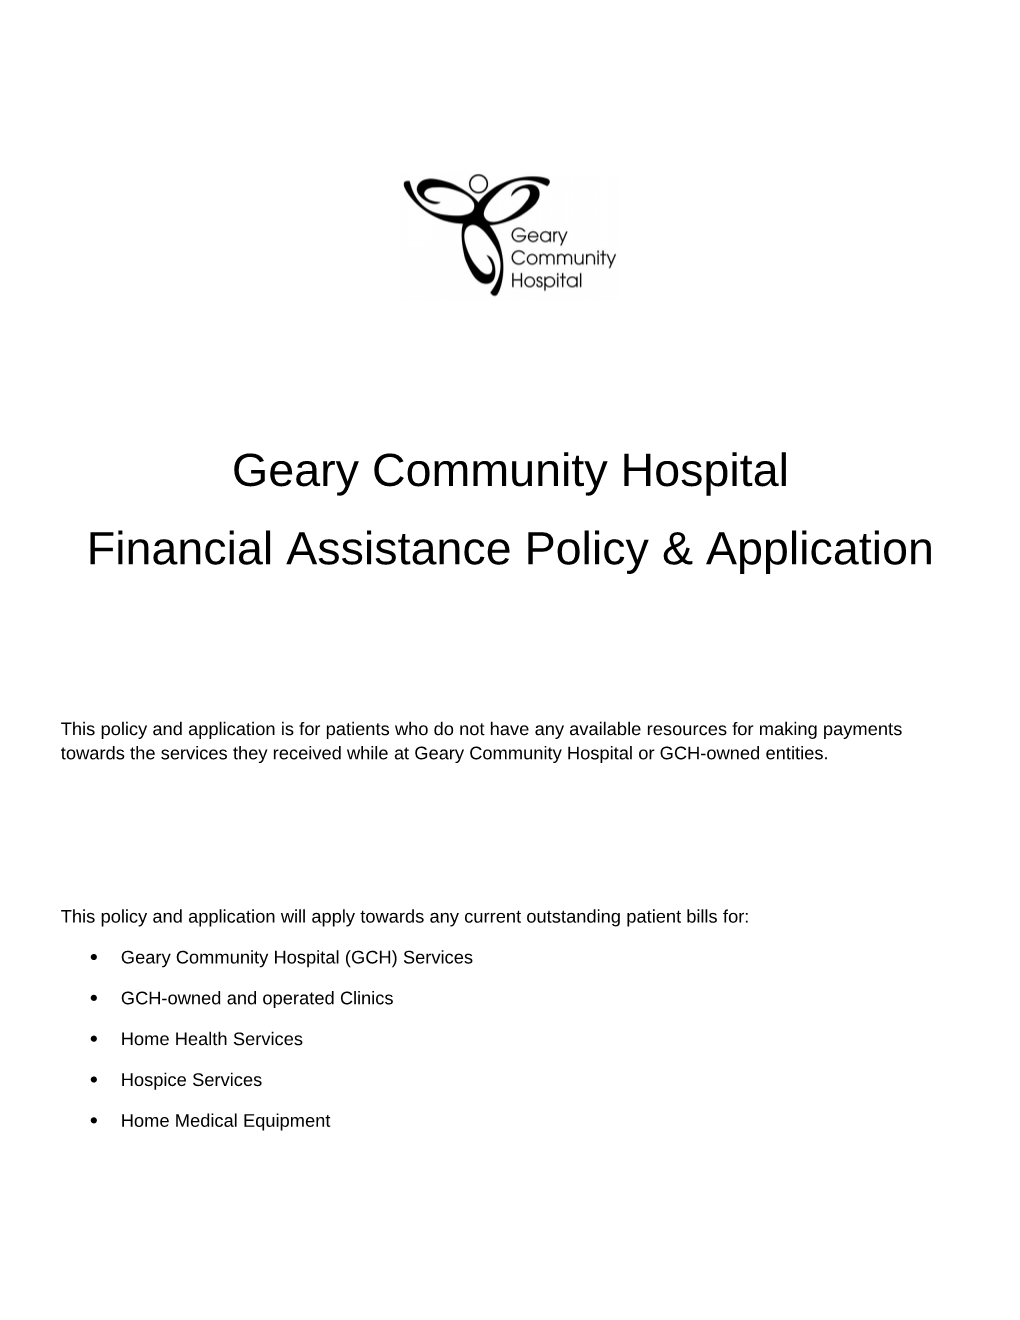 Geary Community Hospital Financial Assistance Policy & Application